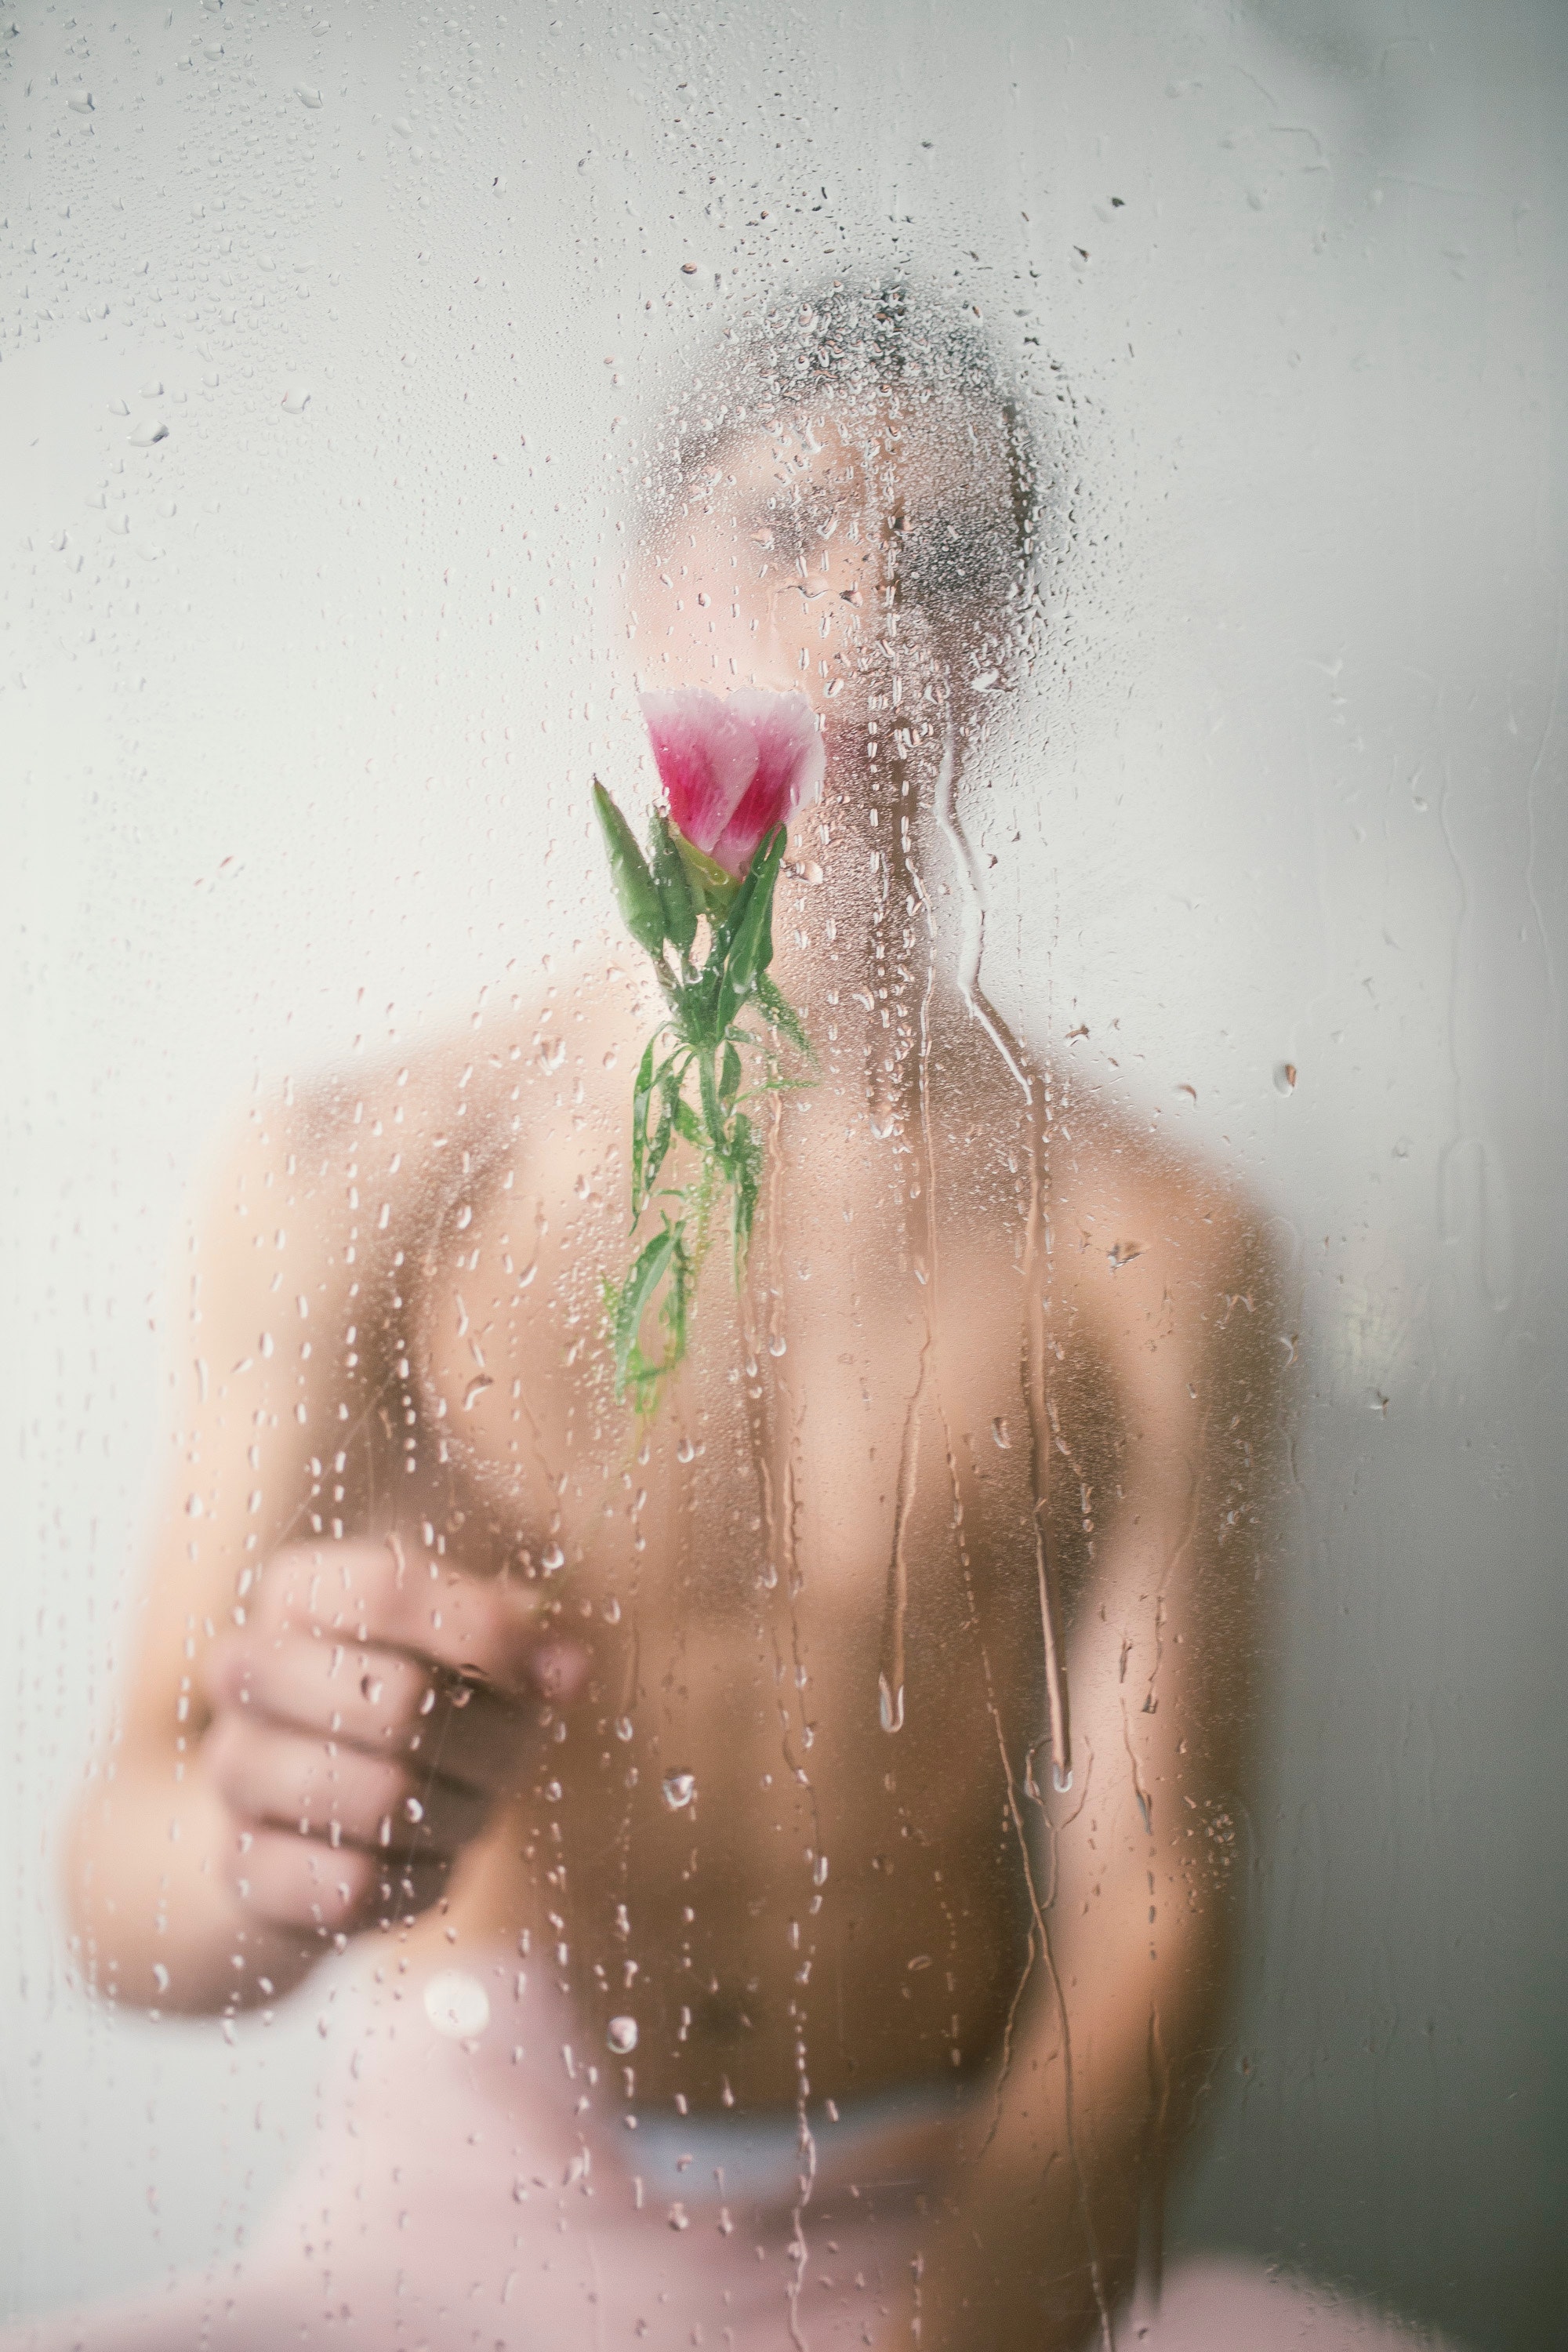 Topless man holding red rose photo